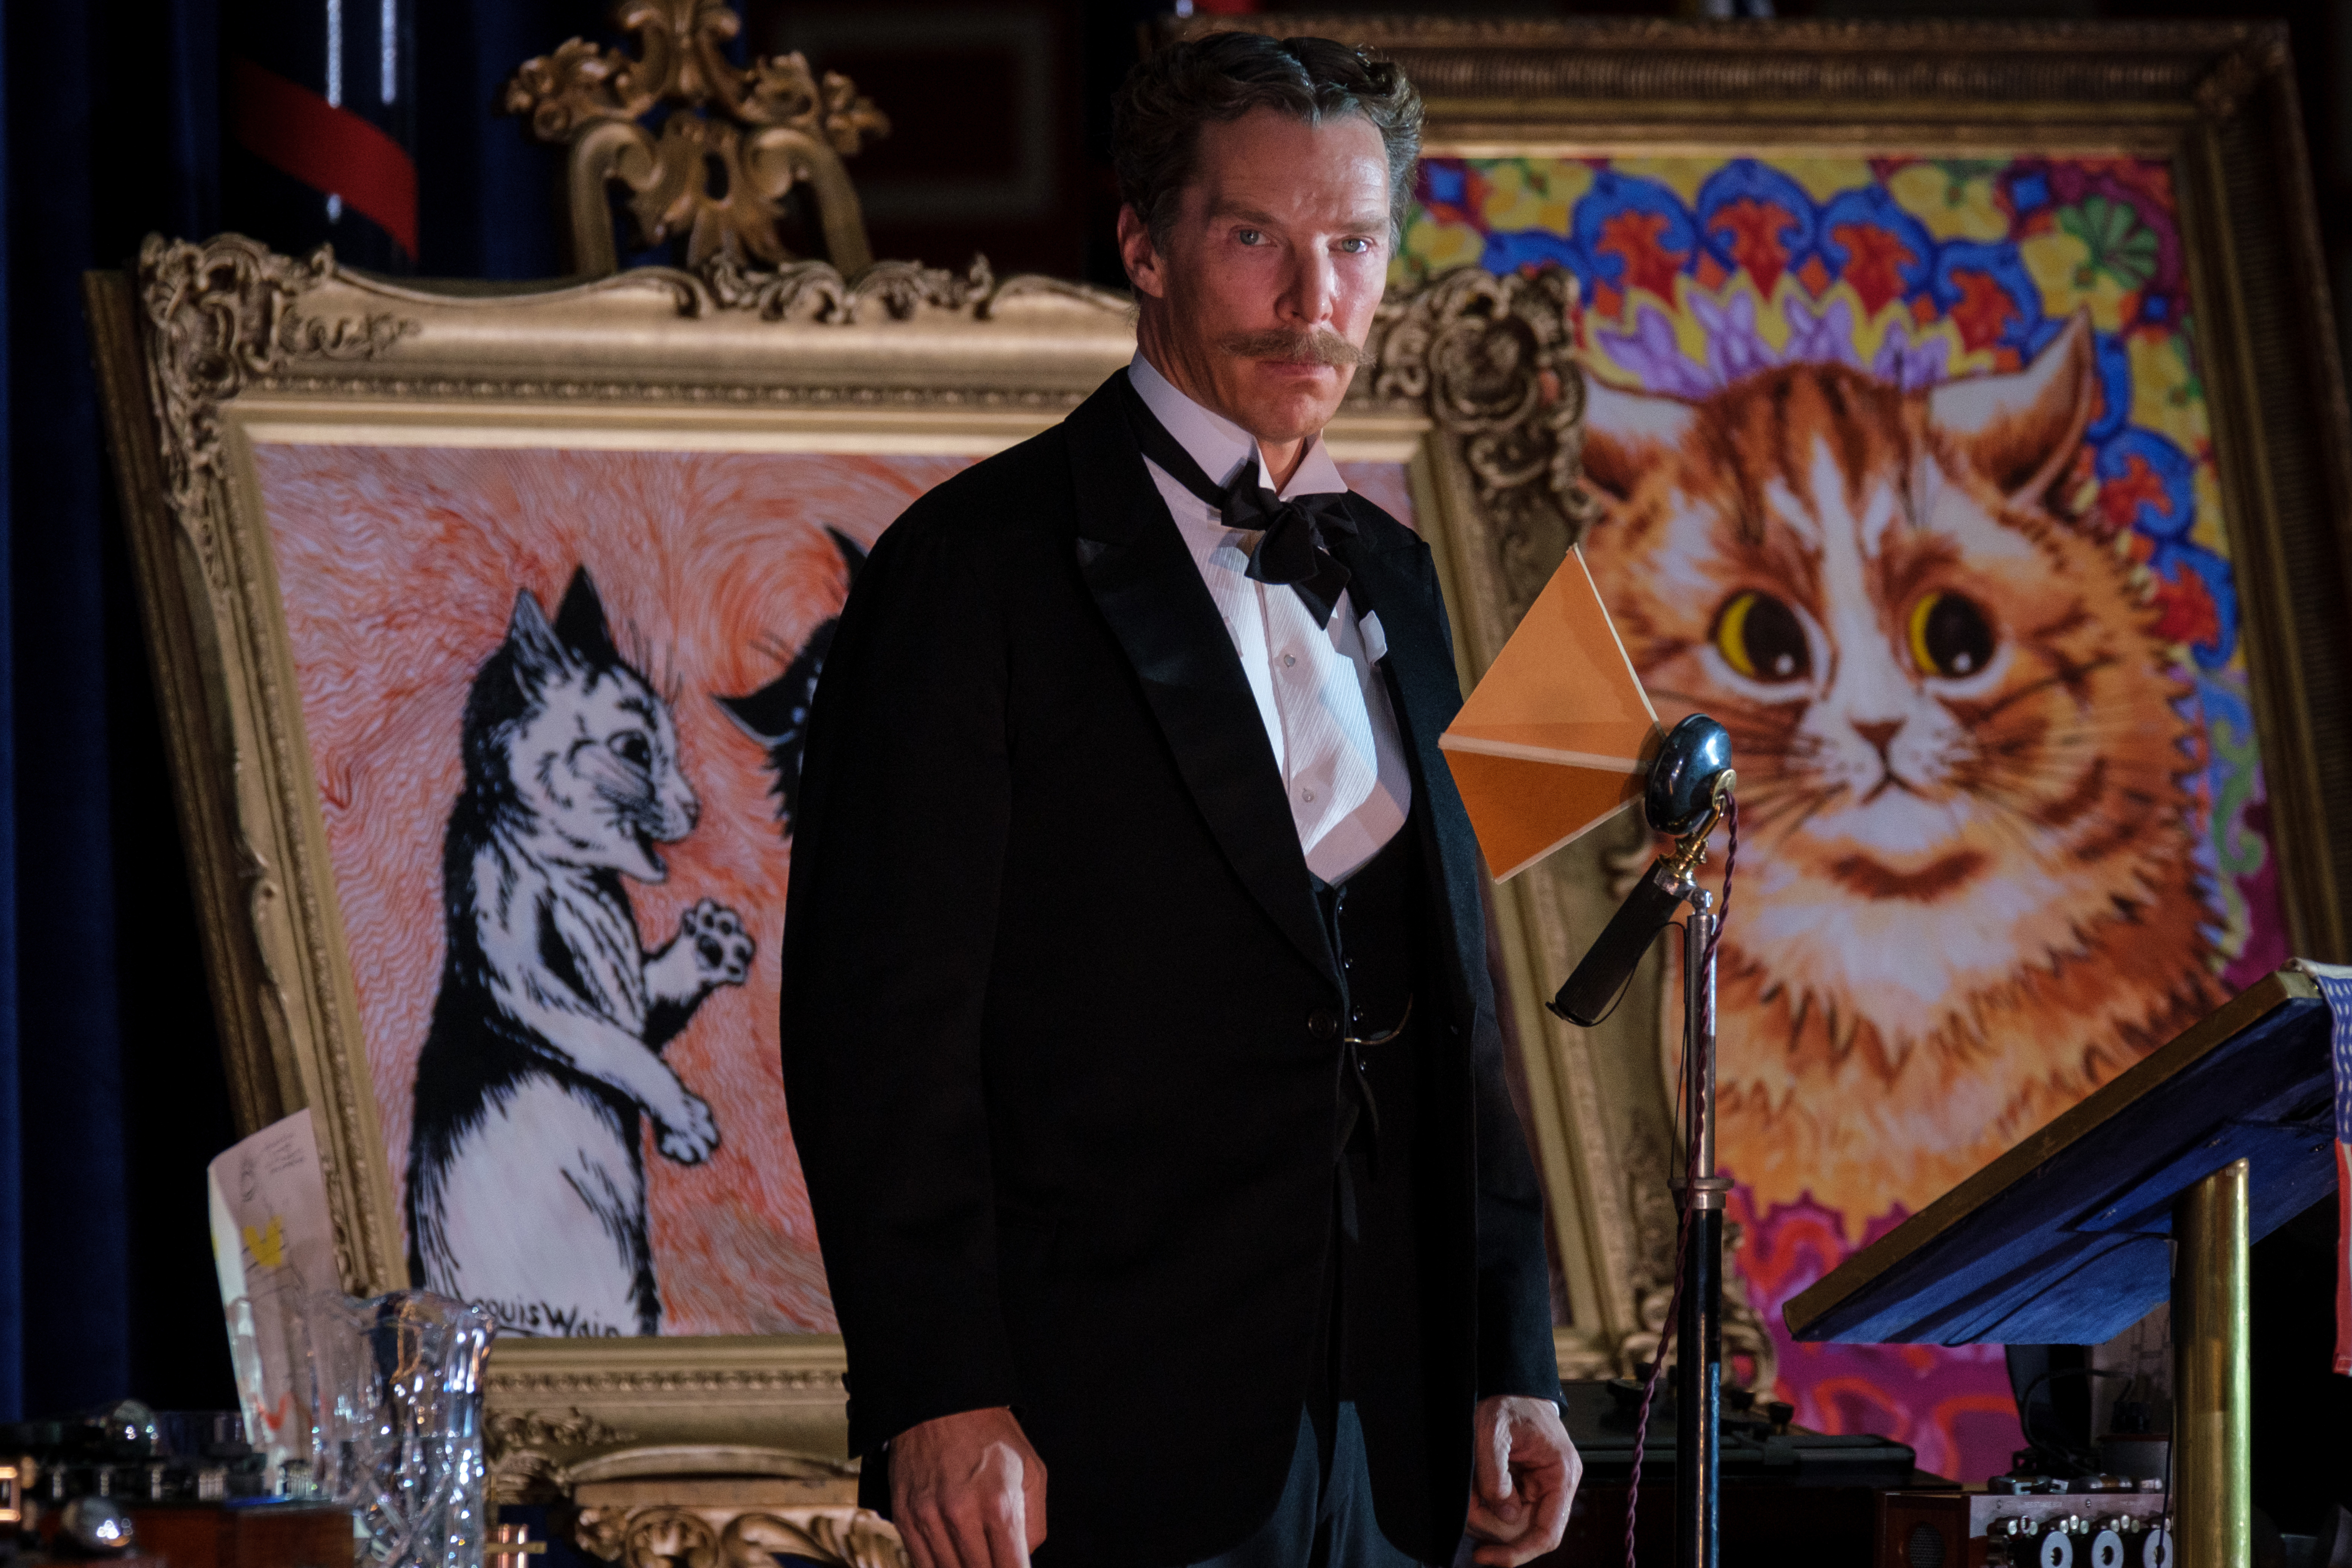 Benedict Cumberbatch The Electrical Life Of Louis Wain Movie Wallpapers